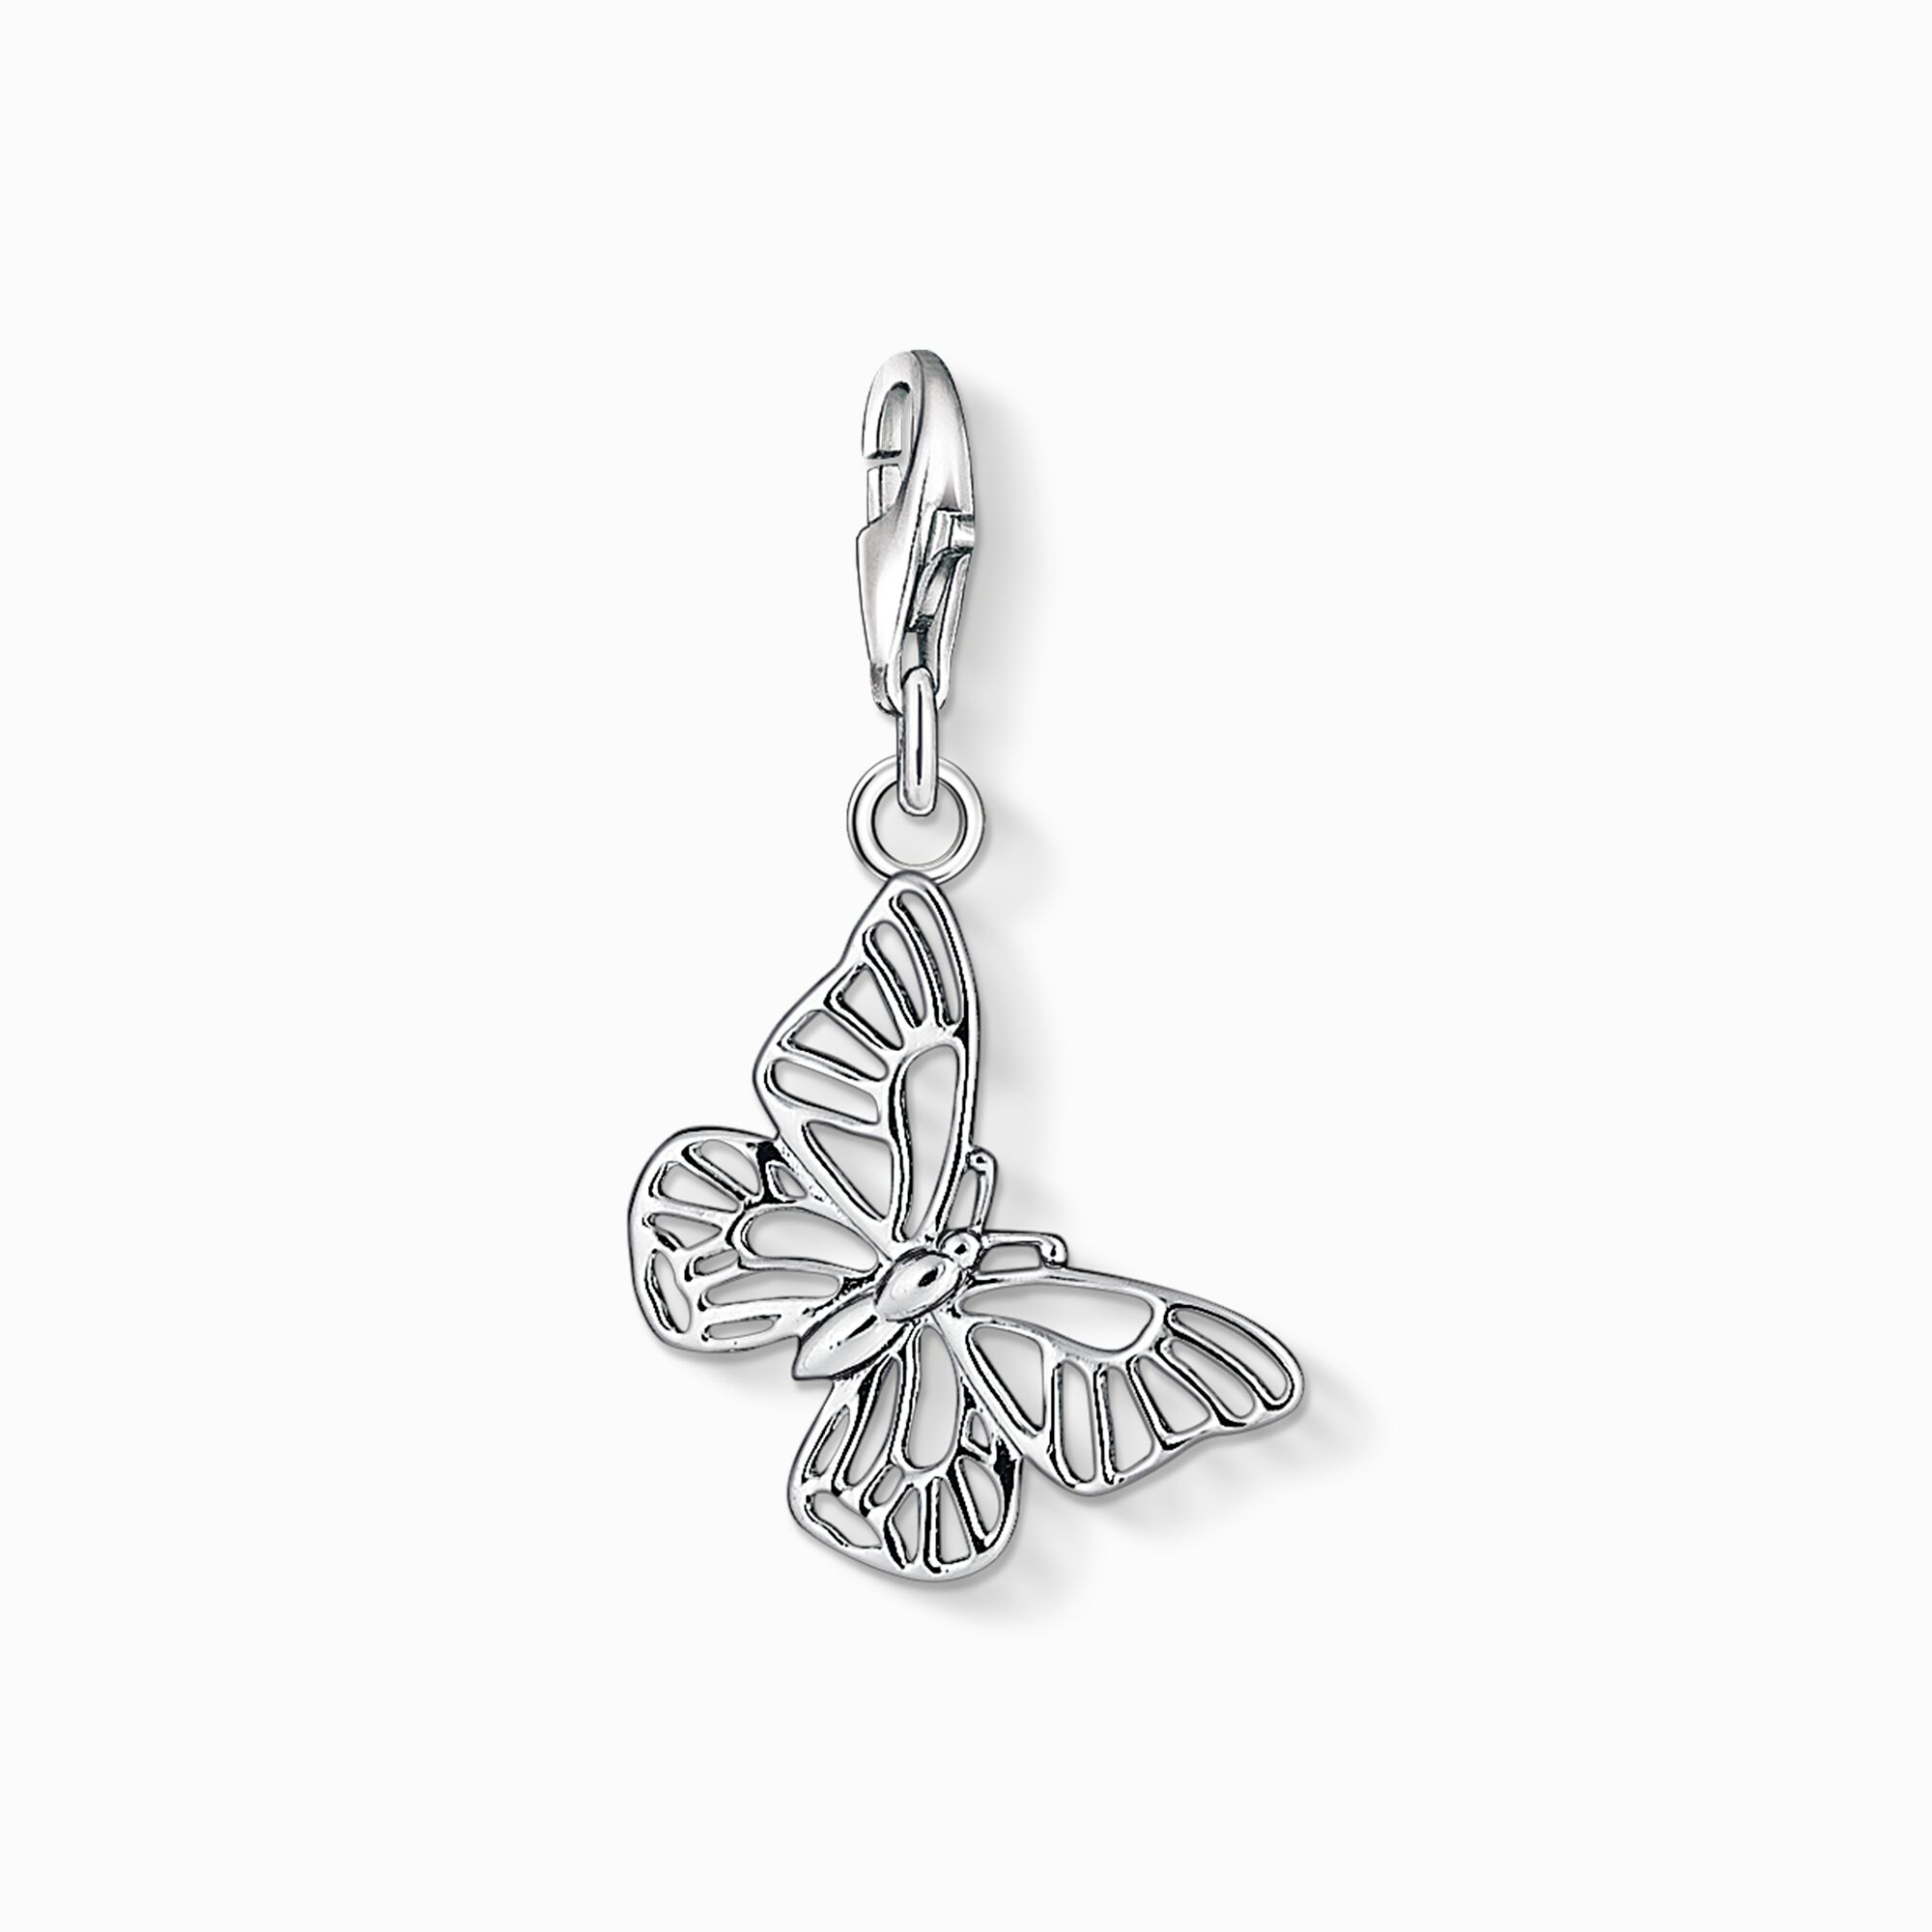 Charm pendant butterfly from the Charm Club collection in the THOMAS SABO online store